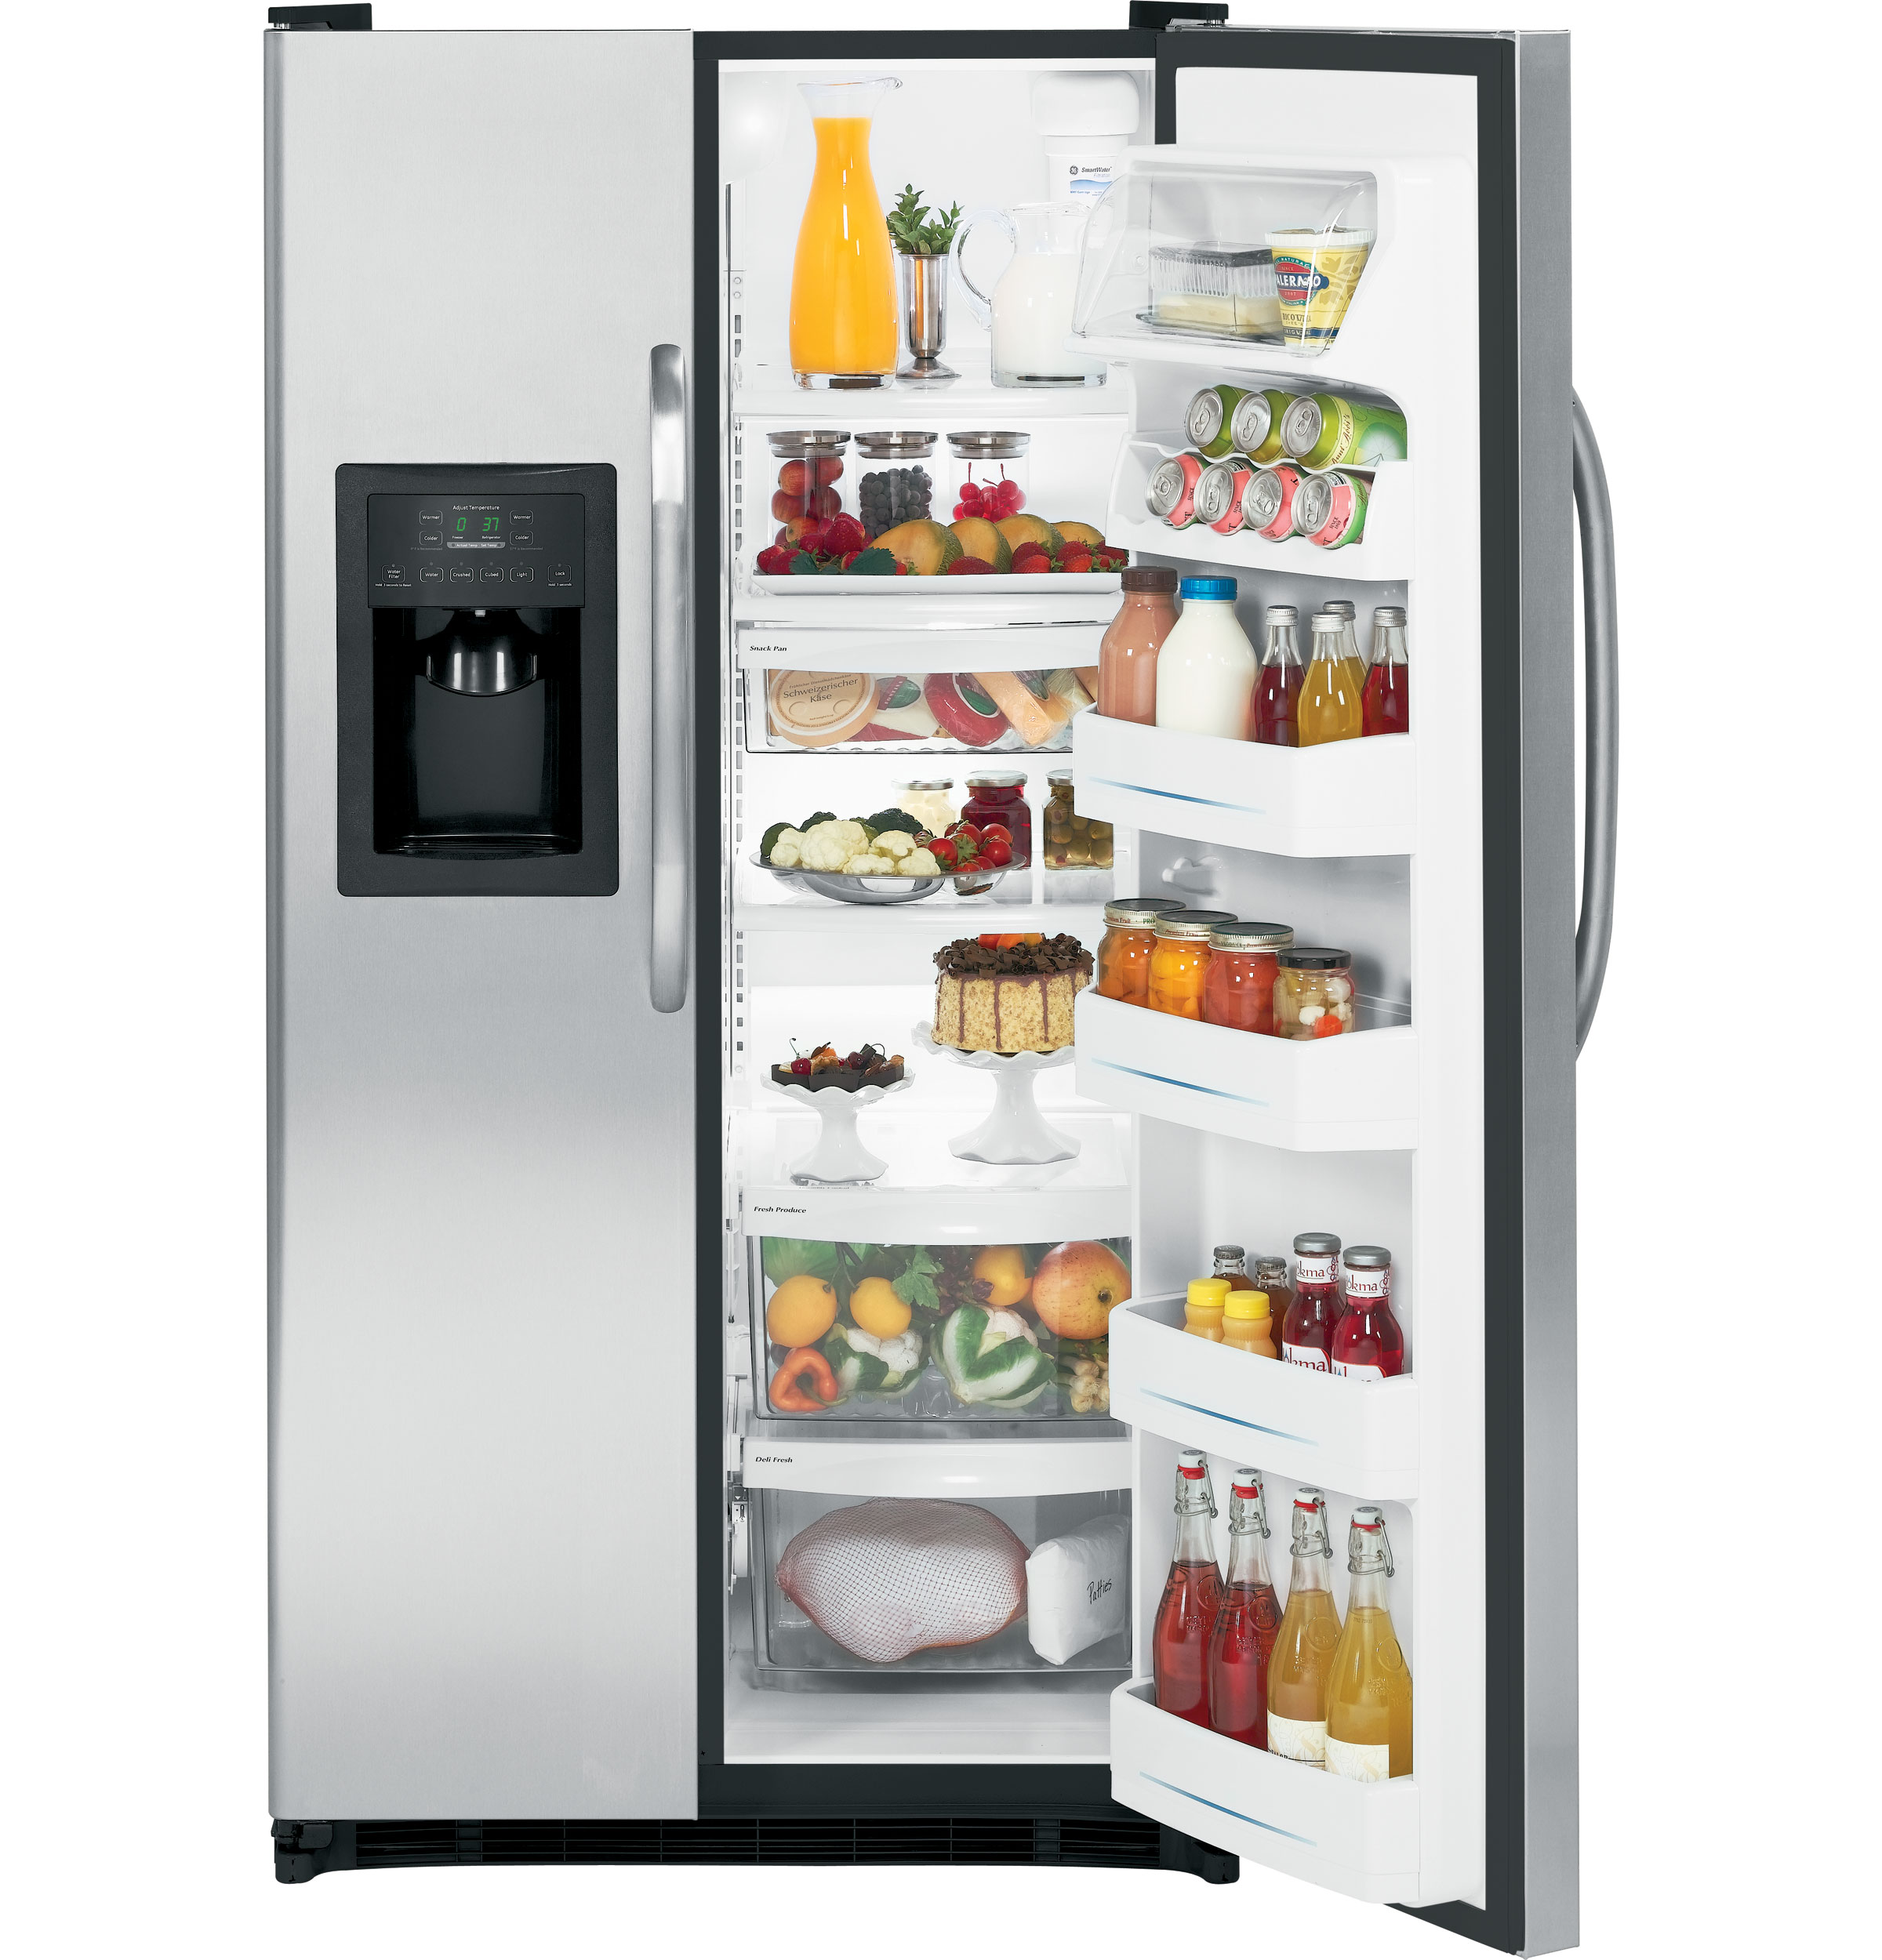 GE® 25.0 ENERGY STAR® Cu. Ft. Side-By-Side Refrigerator with Dispenser